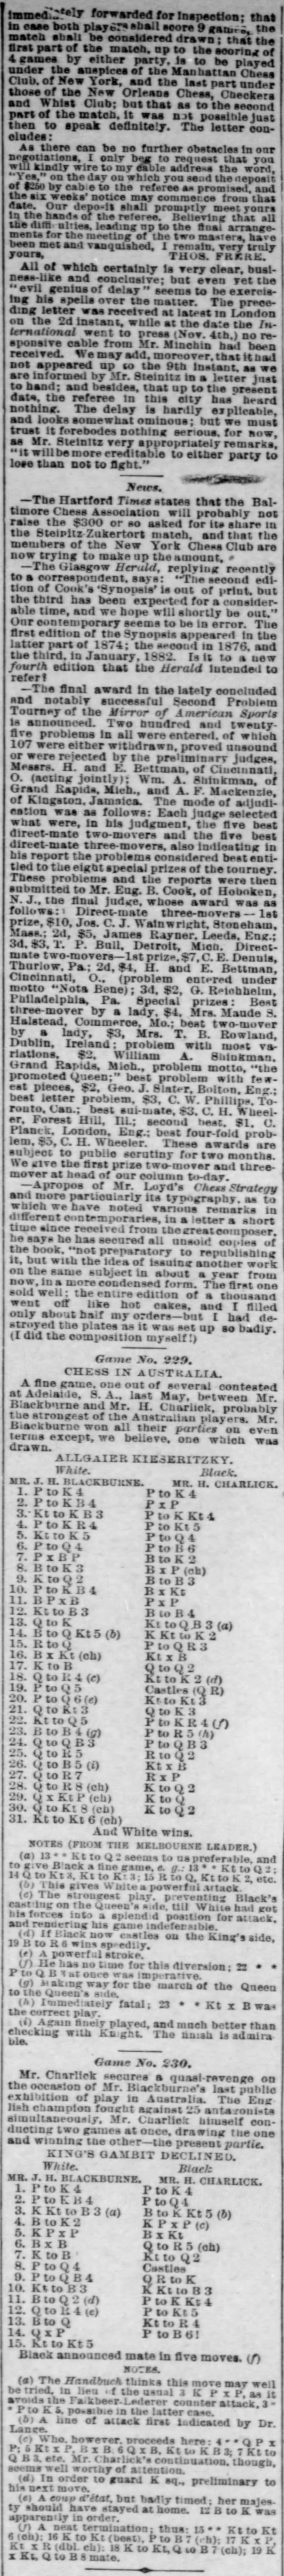 1885.11.21-02 New Orleans Weekly Times-Democrat.png